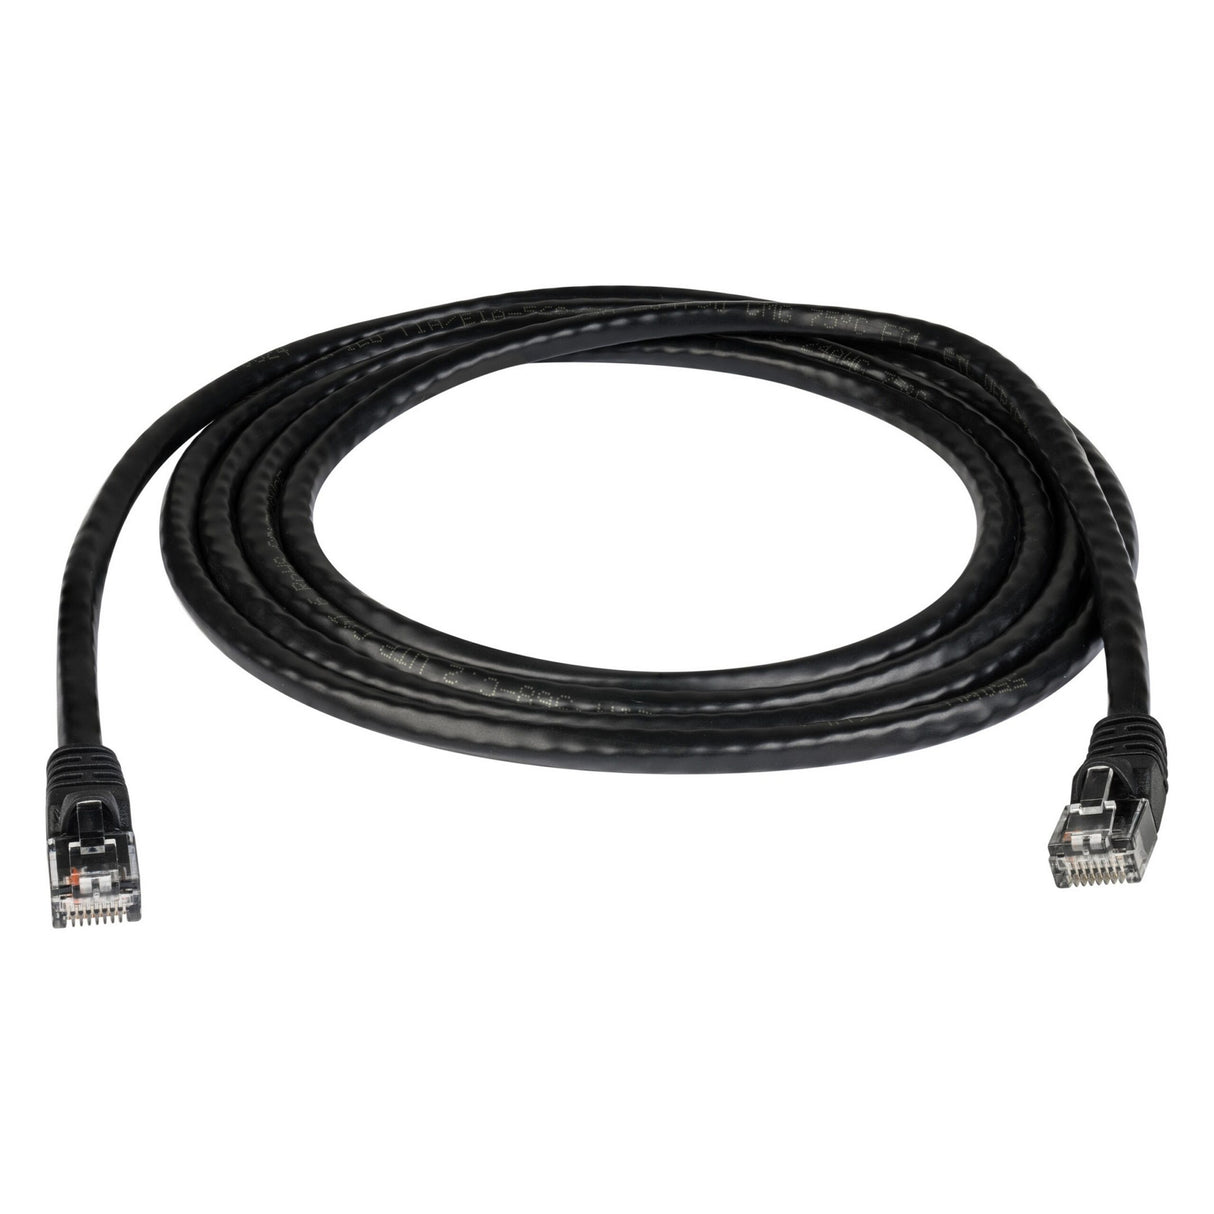 Connectronics Molded UTP Cat6 Patch Cable 24AWG 50u, 15 Foot Black